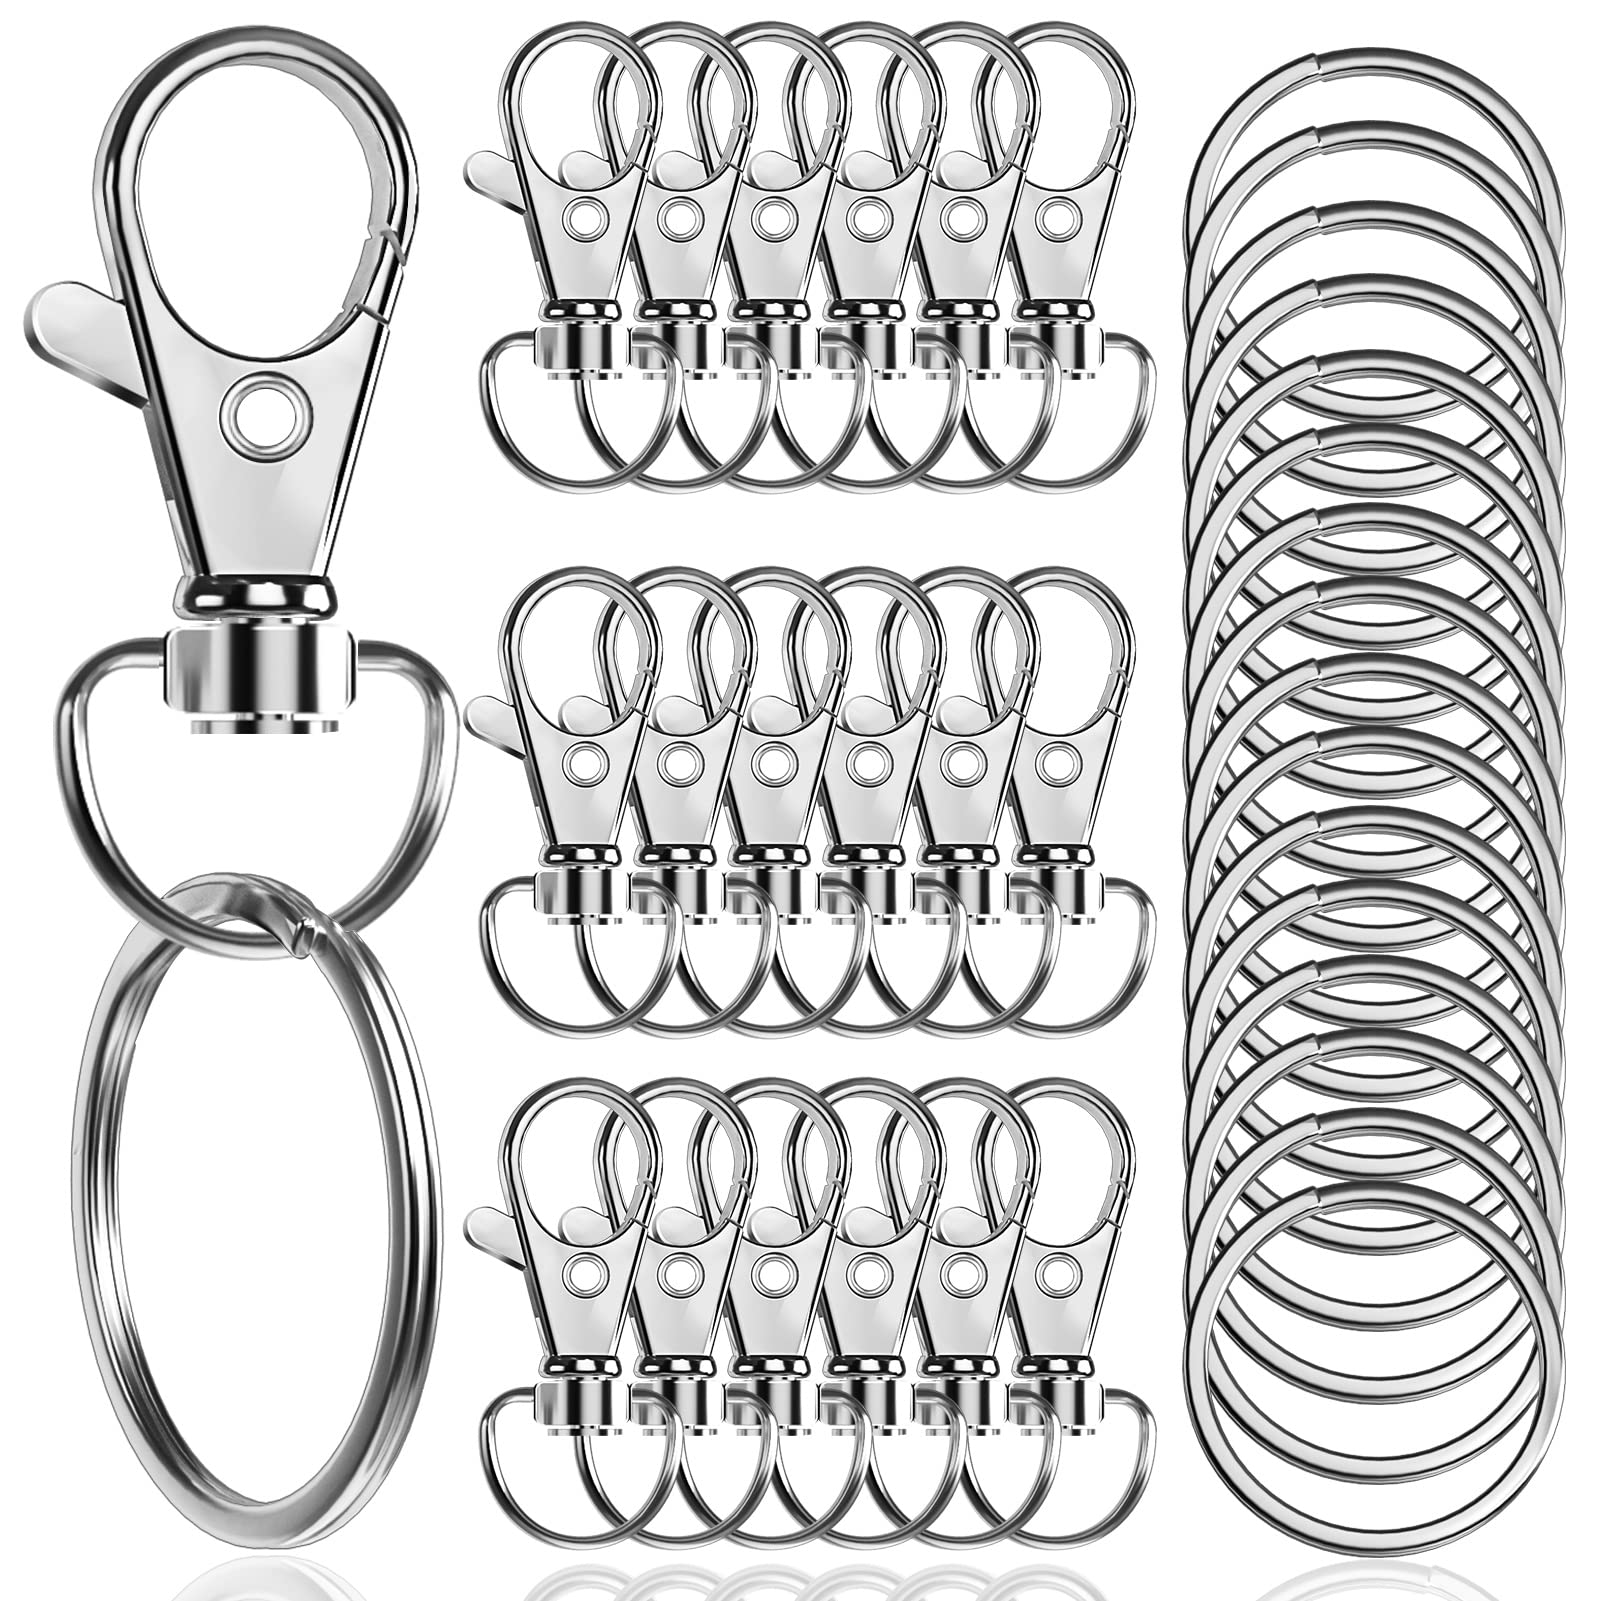 Colorful Metal Swivel Clasp Lanyard Snap Hooks Set Of 10 For DIY Trinkets,  Lobster Clasp Keychain, And Jewelry Making From Likegrace, $3.89